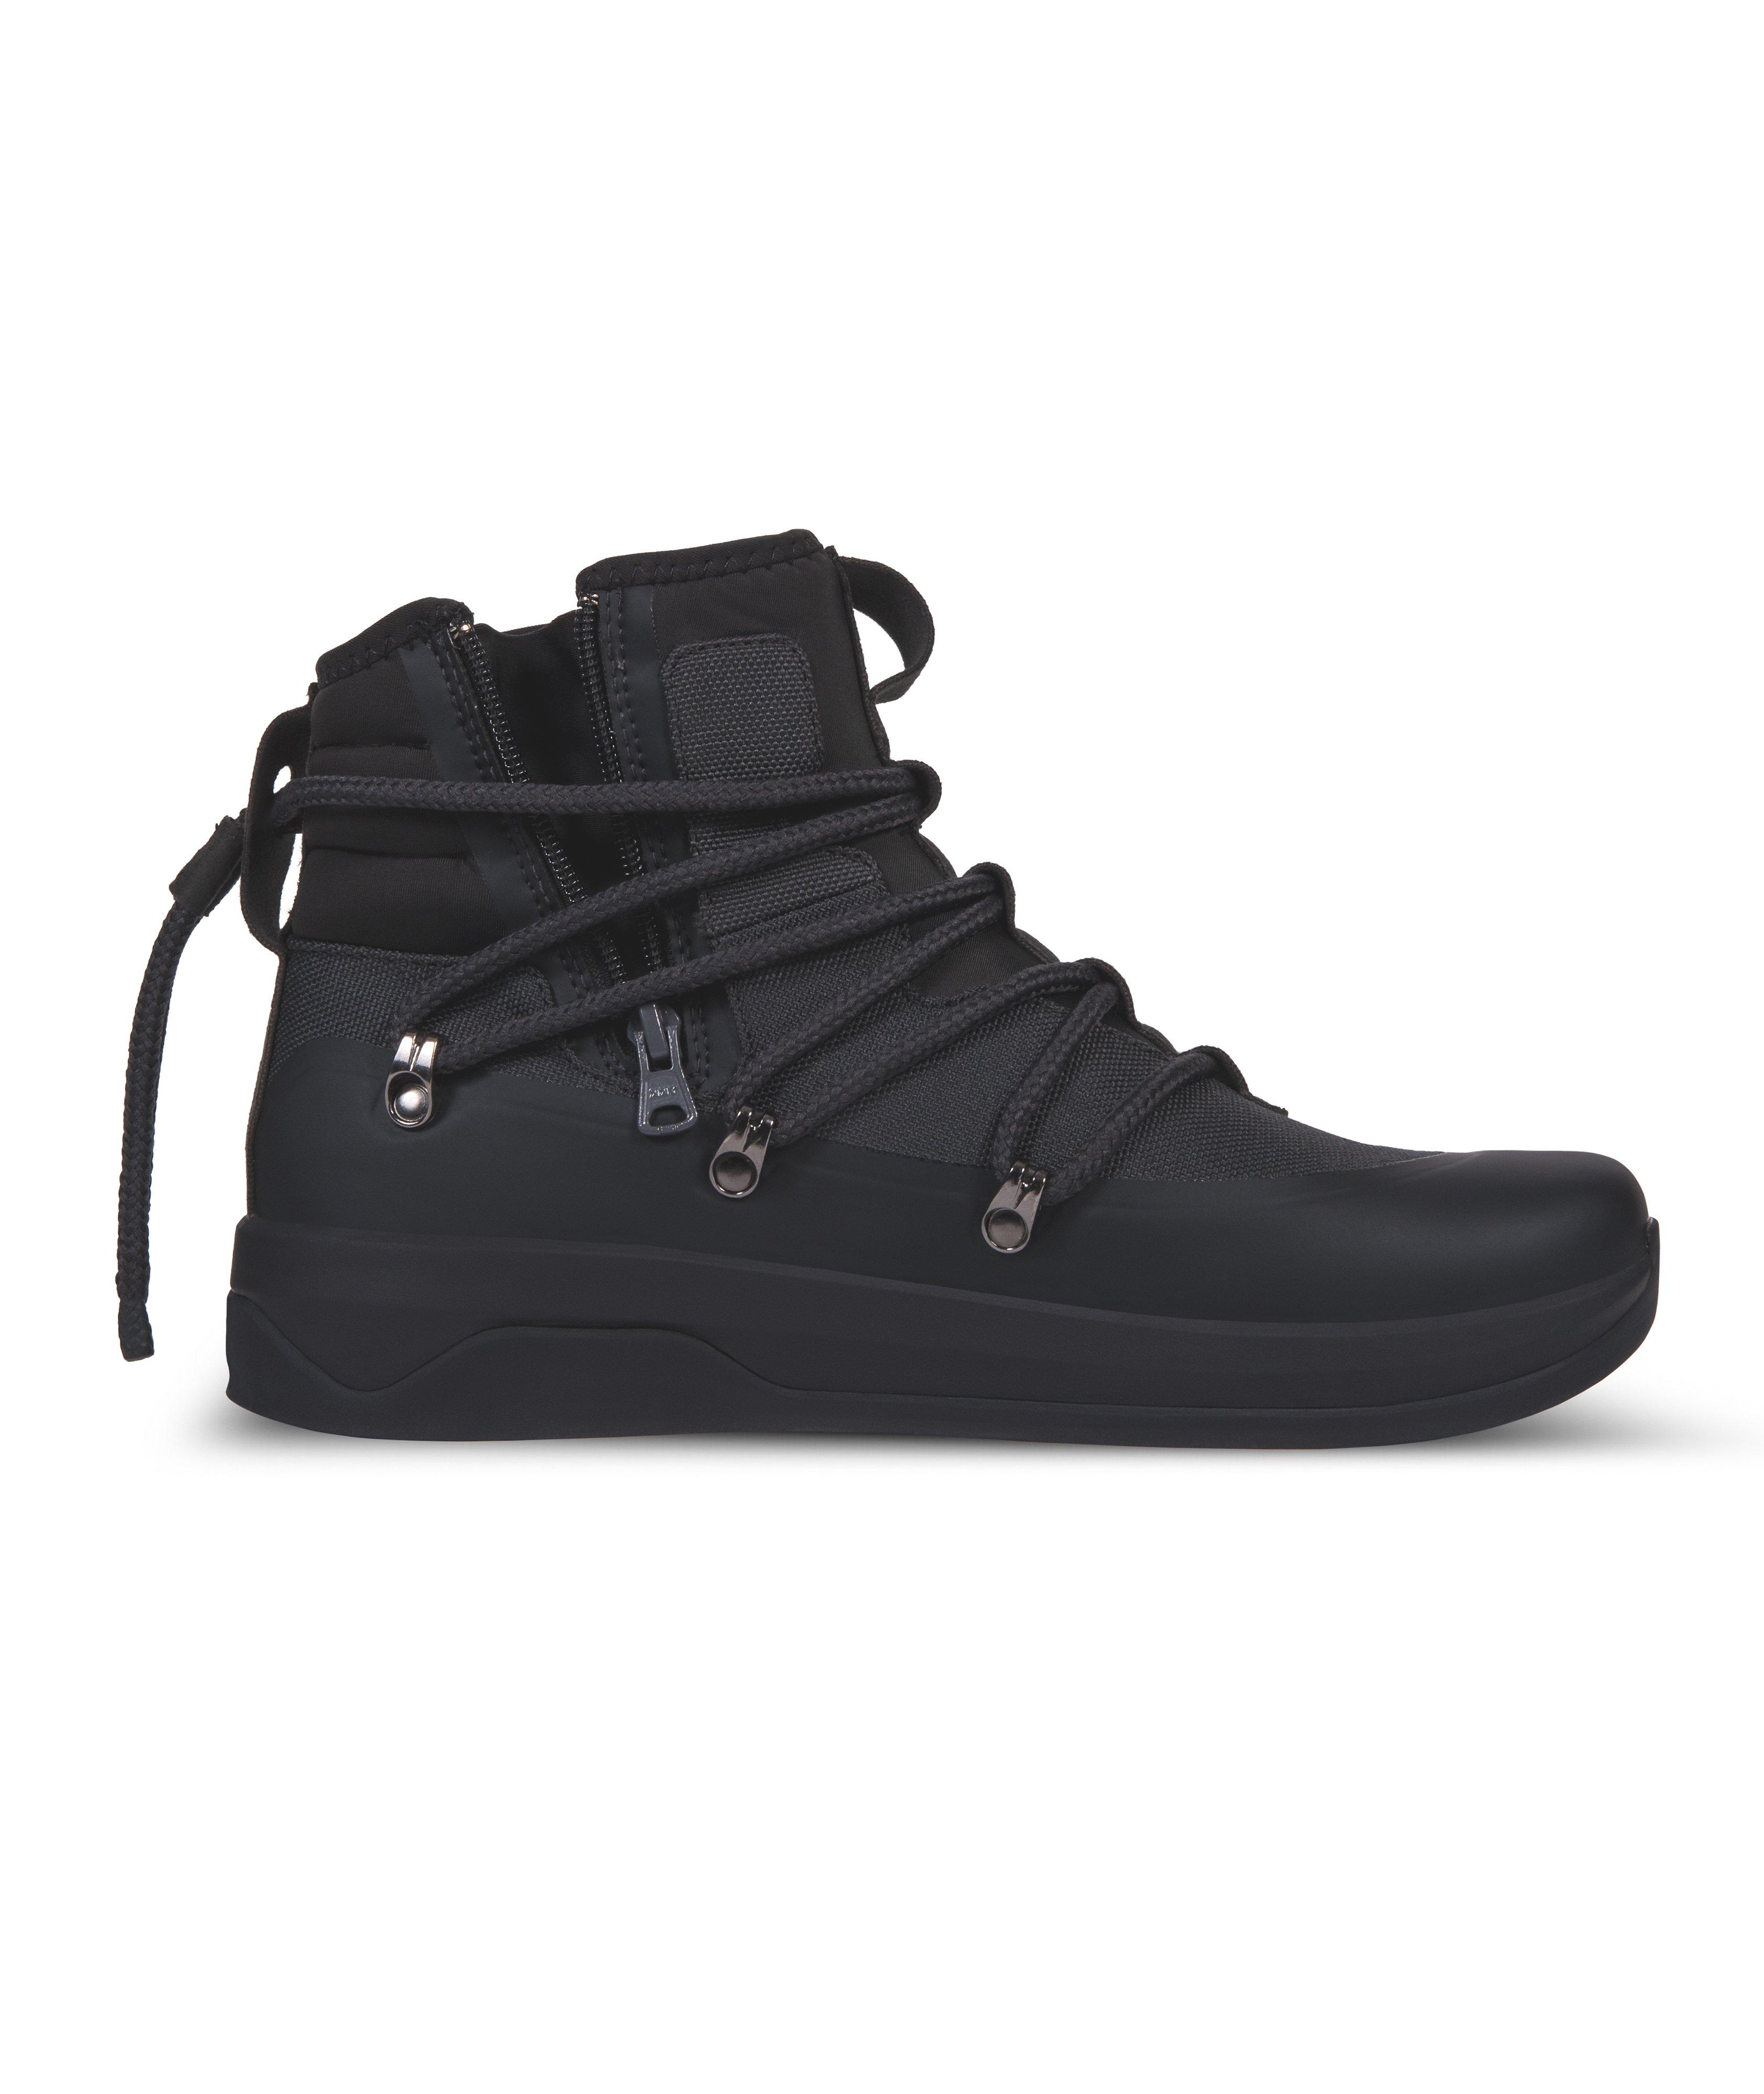 The Stnley High-Top Sneaker Boots image 2